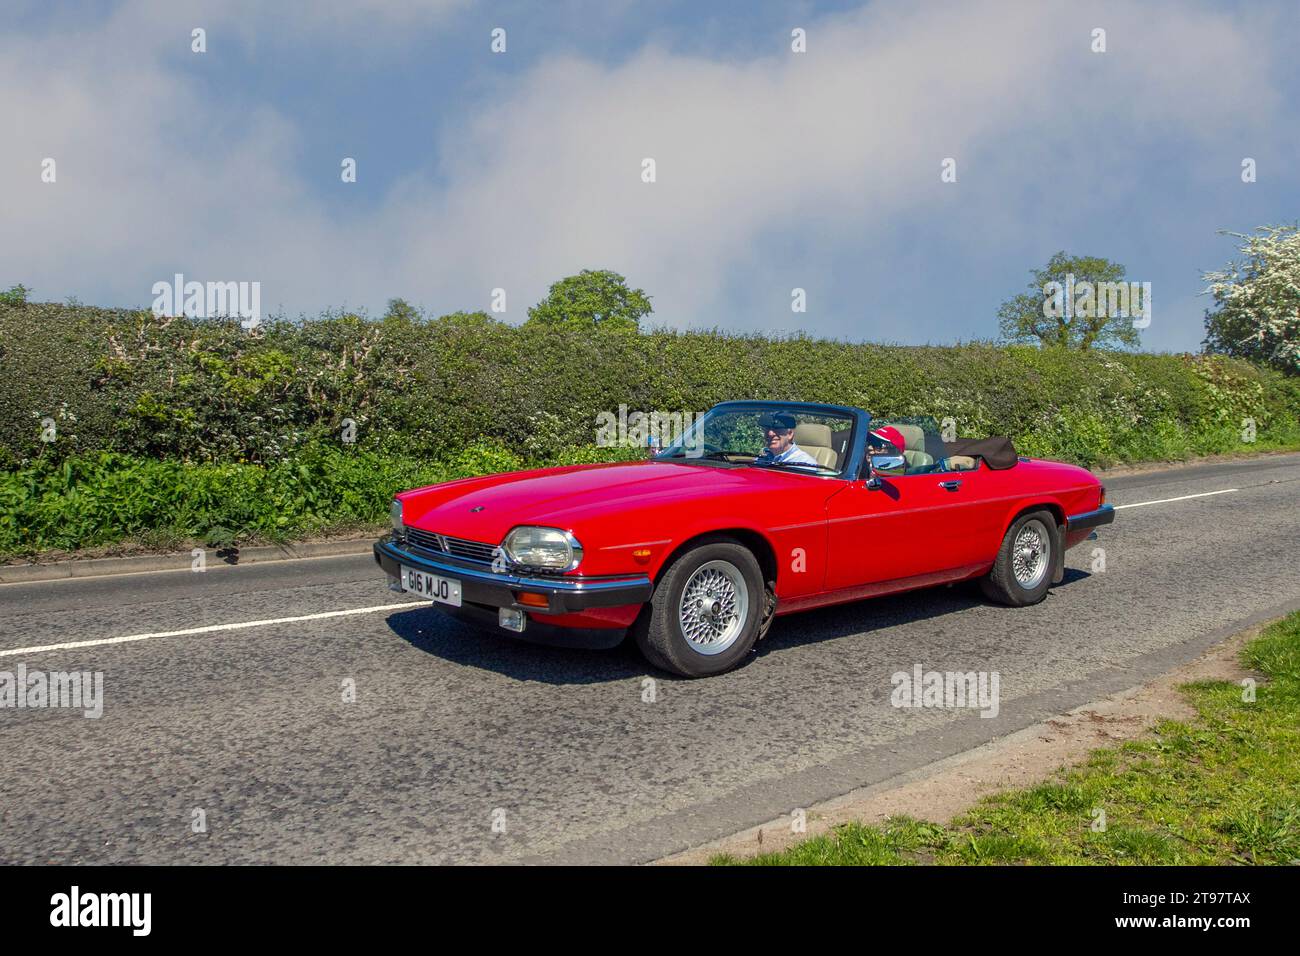 1990 90s nineties British Jagua rXj-S Convertible AutoV12 HE Auto Red Car Cabriolet Petrol 5343 cc; Vintage, restored British classic motors, automobile collectors,  motoring enthusiasts and historic veteran cars travelling in Cheshire, UK Stock Photo